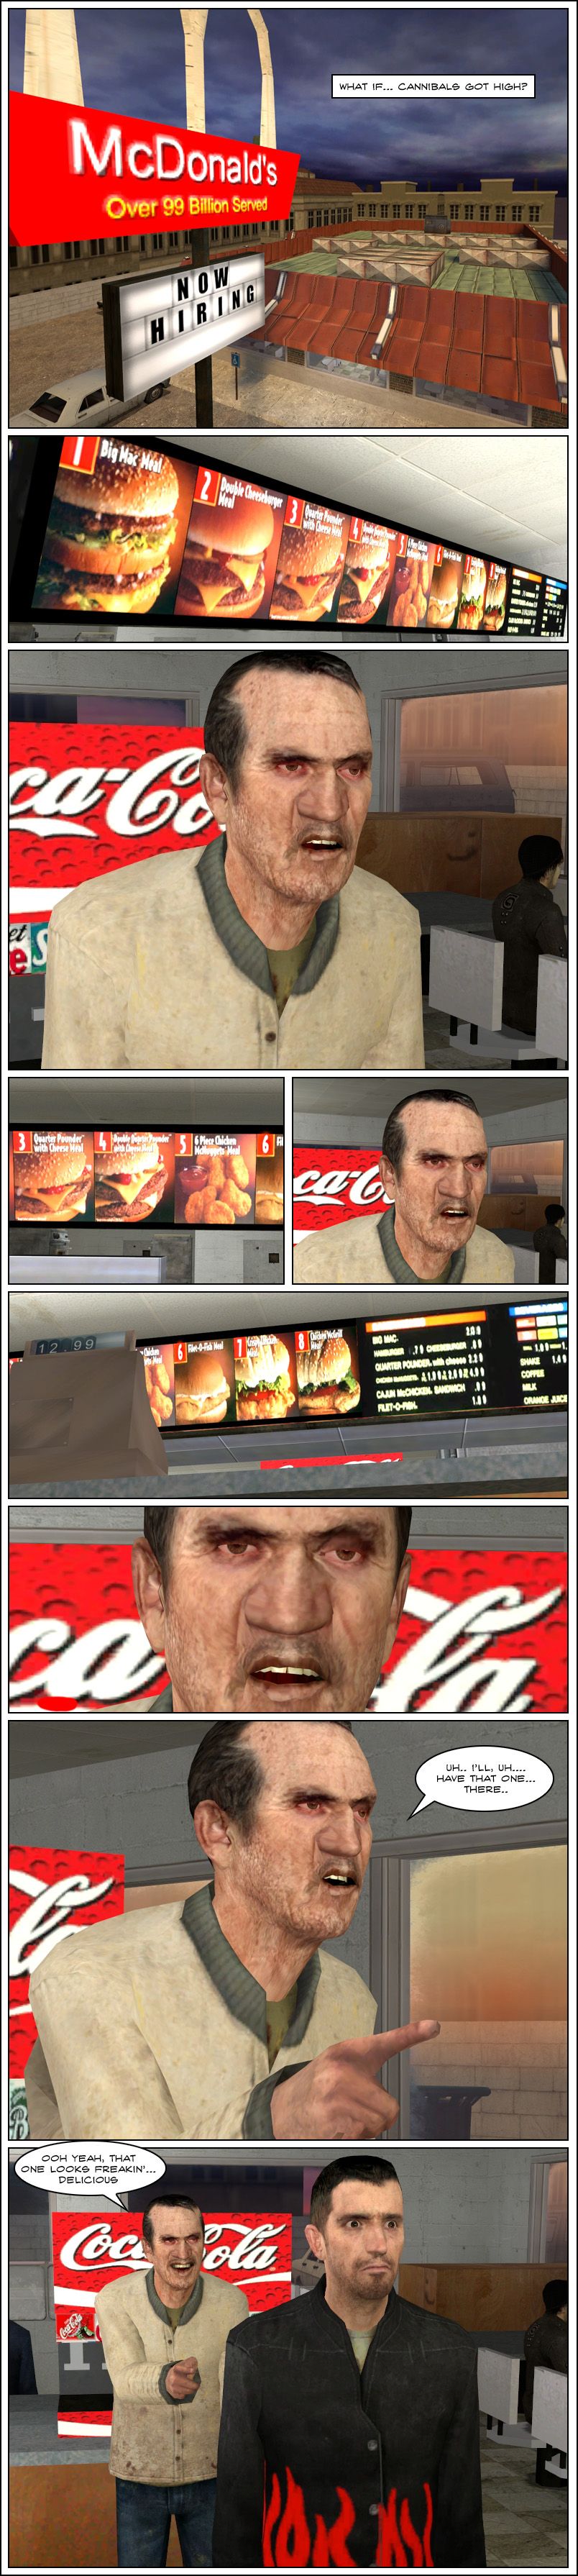 A narration box asks, what if cannibals got high. We see a McDonald's and a man with red circles around his eyes inside, staring towards the menu. He keeps staring for a moment, then says he'll have that one there. He points to the man in front of him and grins that that one looks freaking delicious. The end.